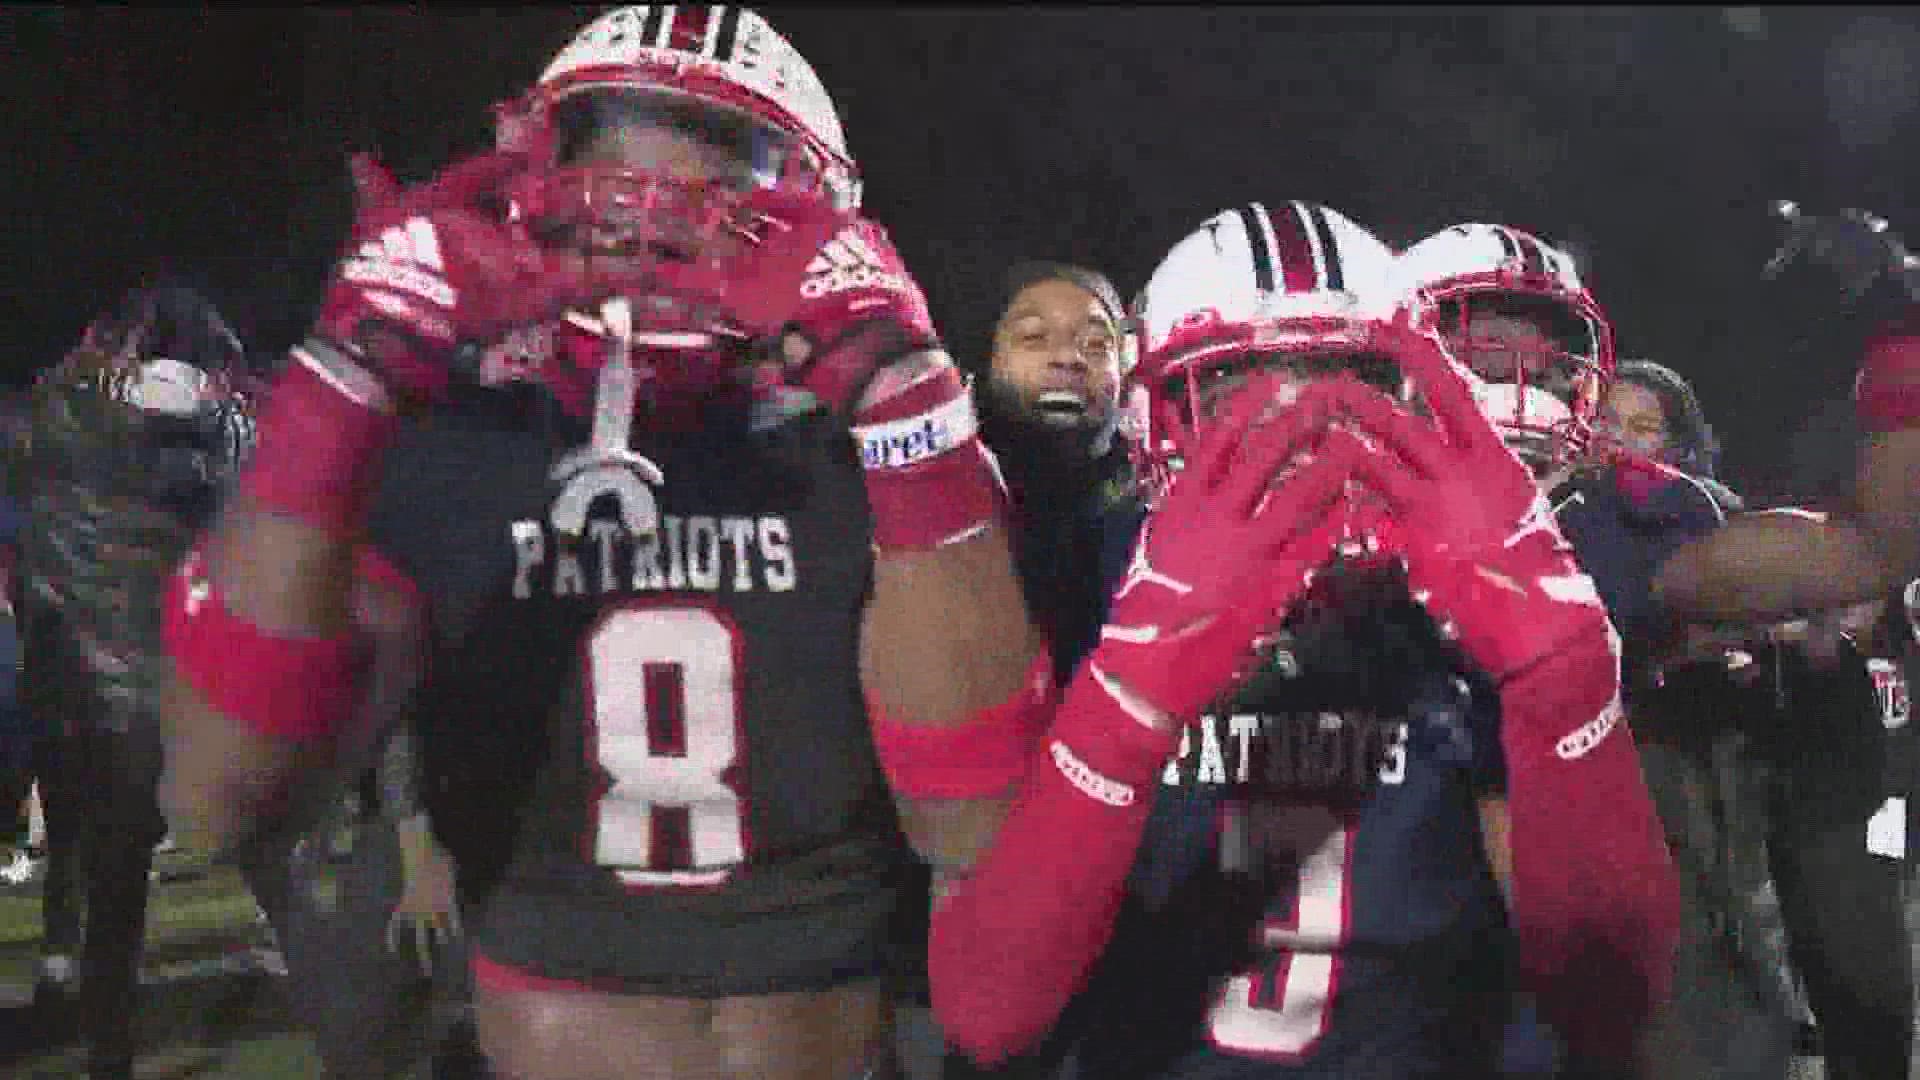 Sandy Creek would pour it on to advance to their first state title game in 10 years by winning 49-14.